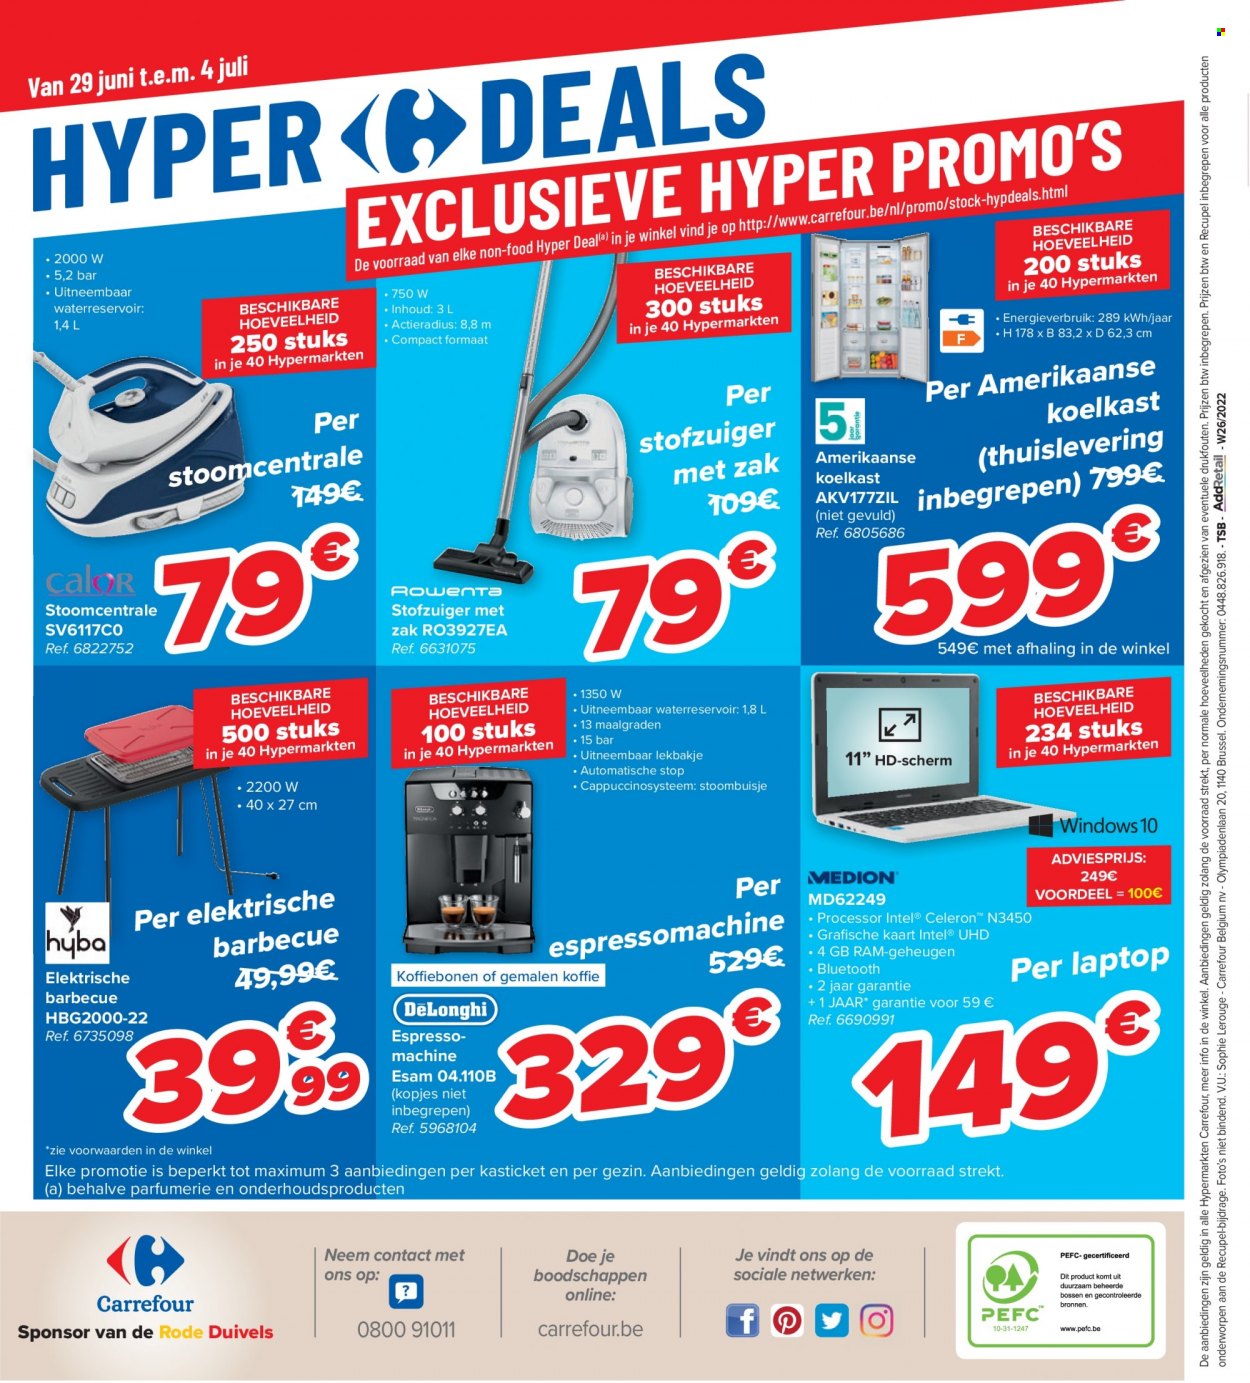 Catalogue Carrefour hypermarkt - 29.6.2022 - 11.7.2022. Page 20.